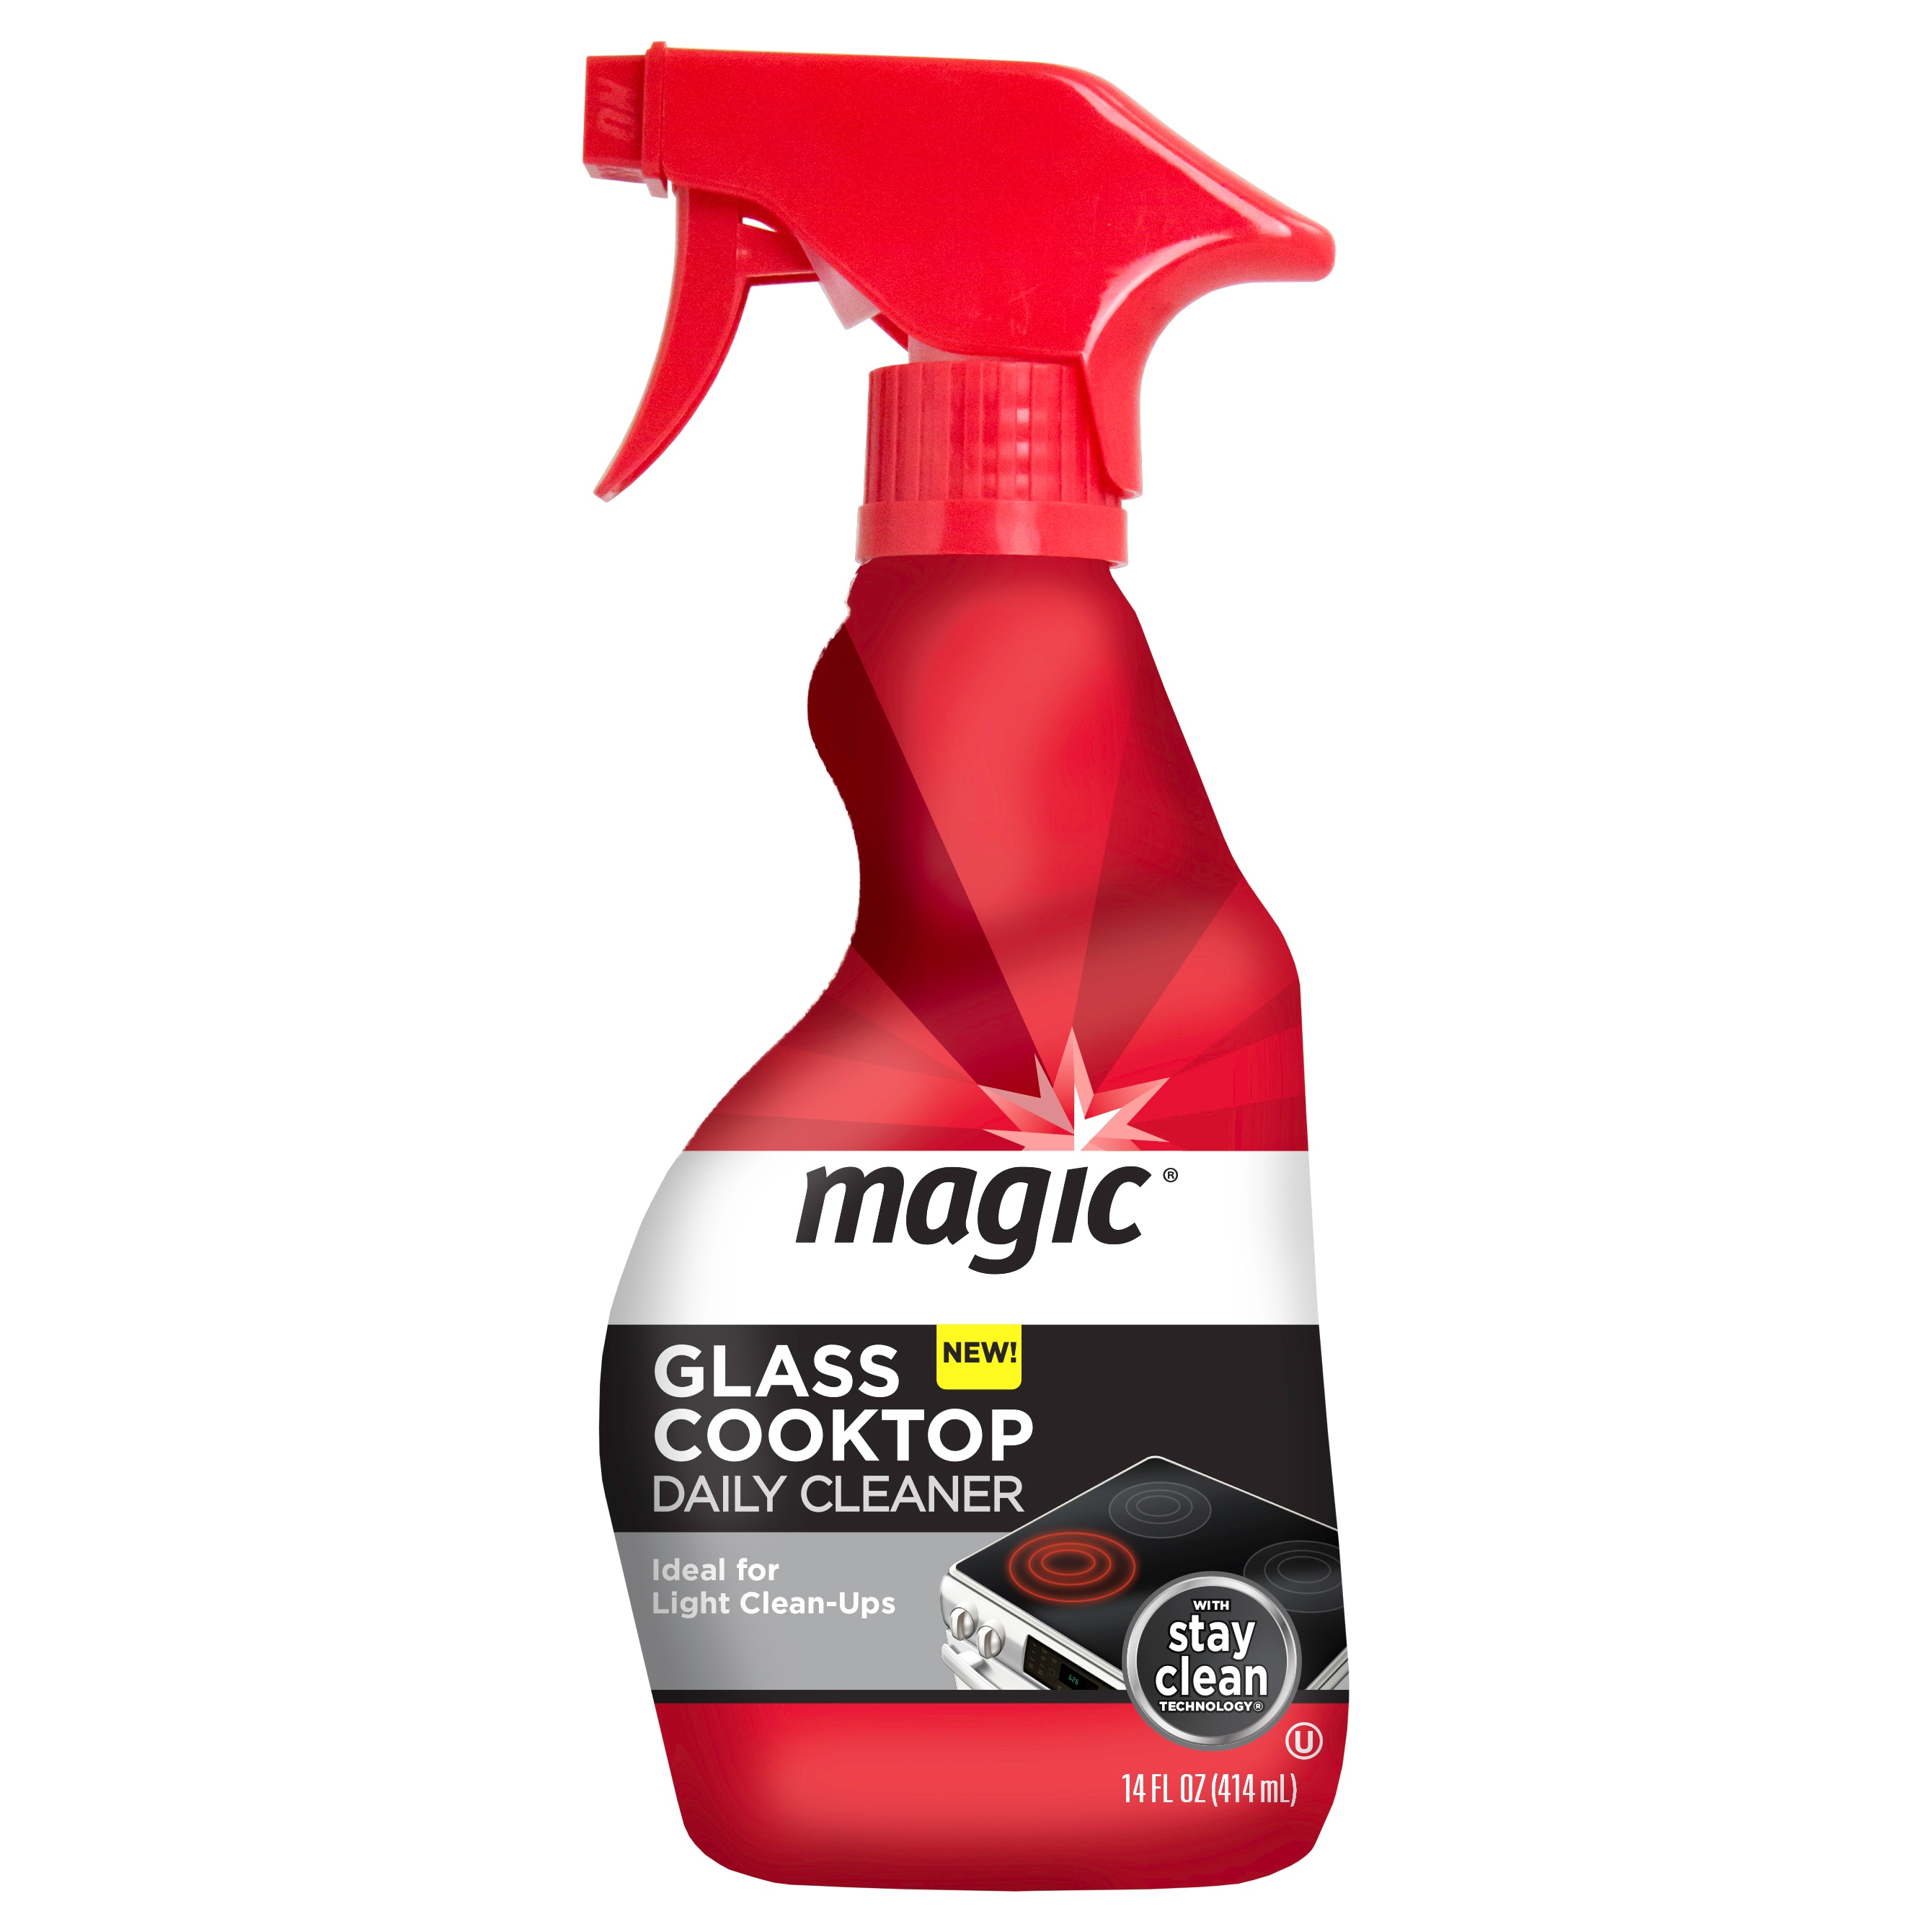 Magic Glass Cooktop Daily Cleaner - 14 fl oz Spray Bottle - Removes  Burned-On Foods, Grease, and Residue - Green Apple Scent in the Cooktop  Cleaners department at